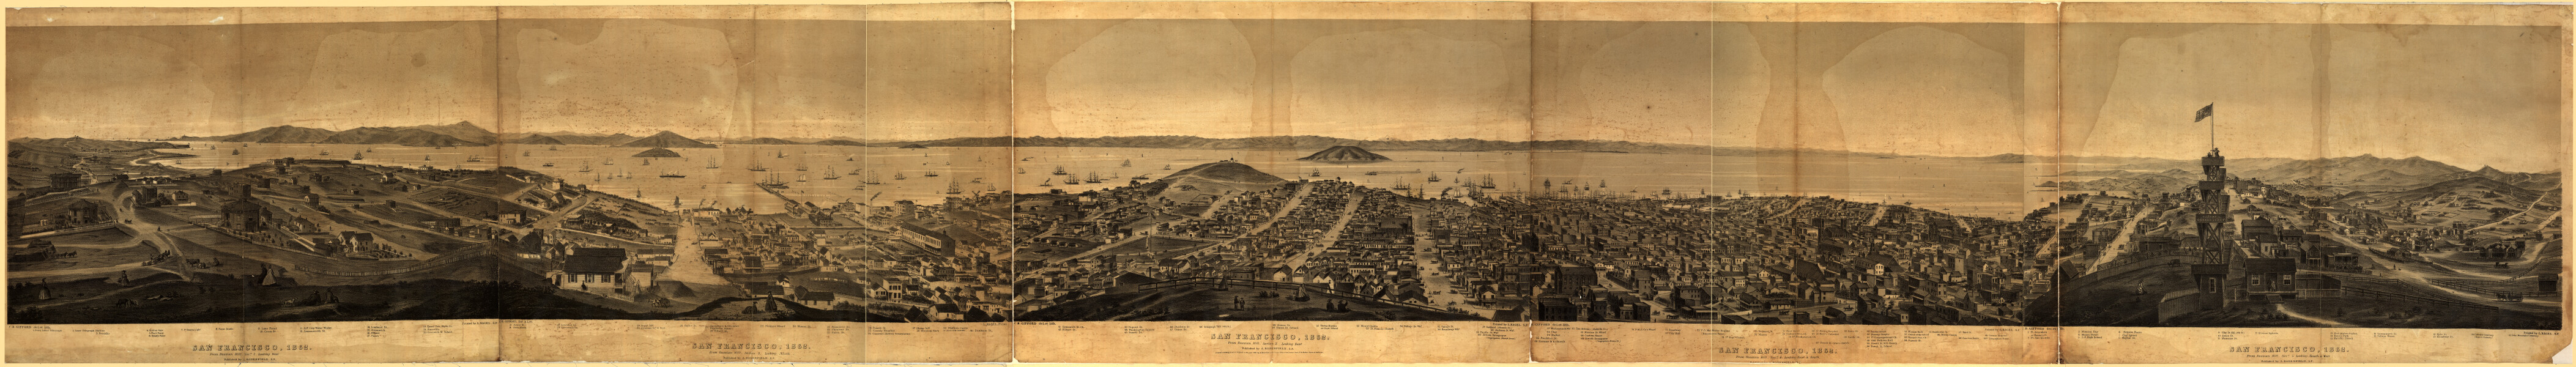 E65 - San Francisco from Russian Hill - Charles Gifford - 1862